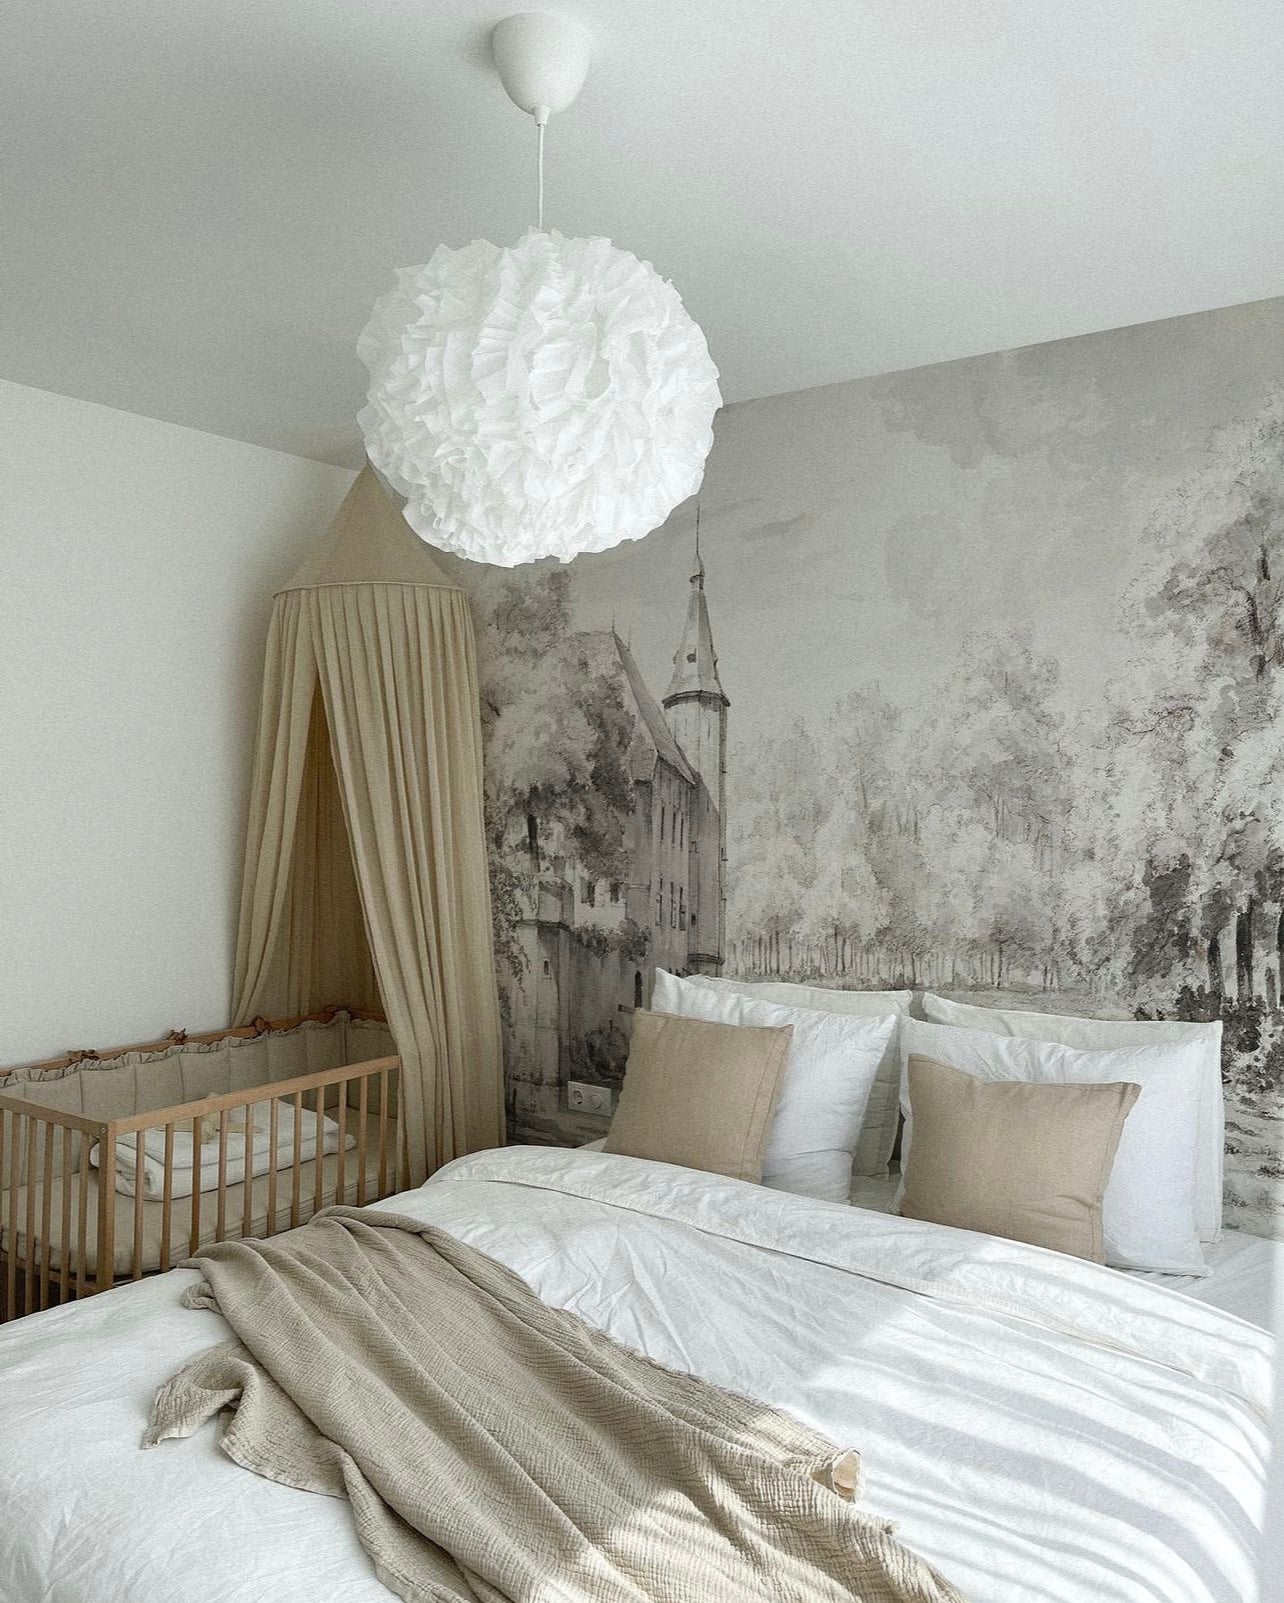 Charming nursery with a 'Kasteel Soelen - Wall Mural Wallpaper' showcasing a historic castle in a pastoral setting. The mural’s soft greyscale palette harmonizes with the room’s muted colors and plush bedding.